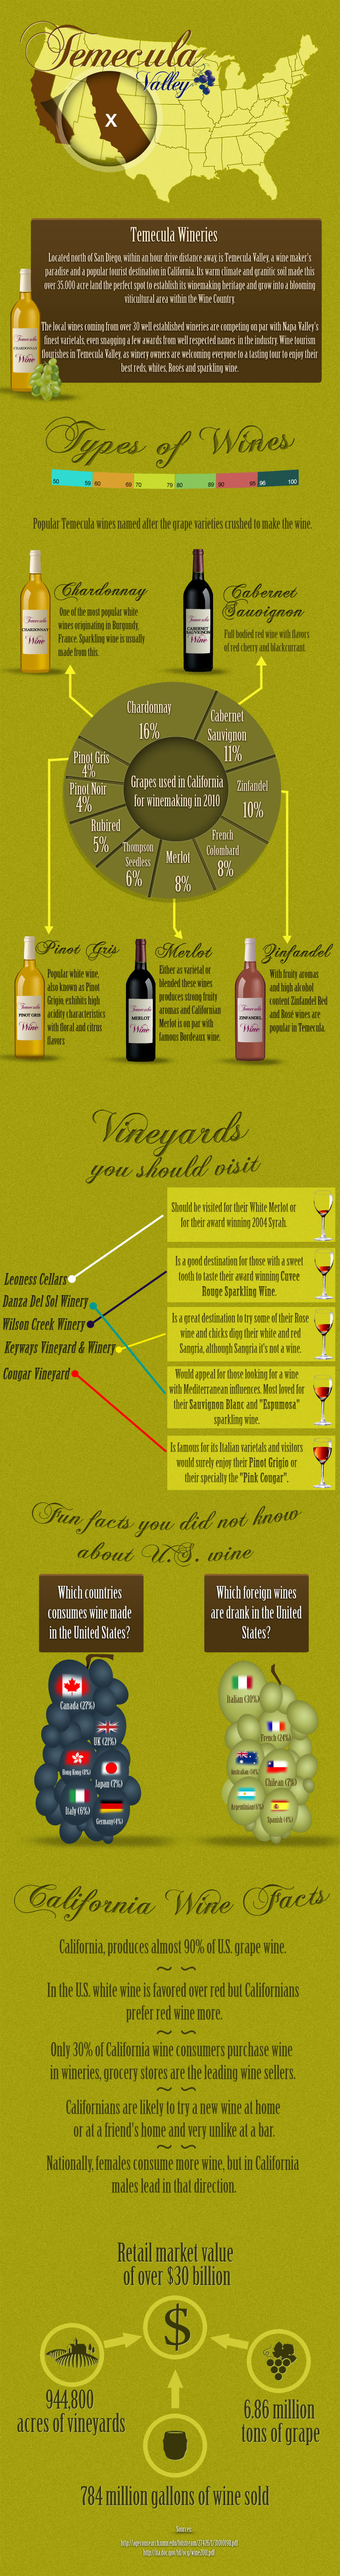 Temecula Valley Wineries: Facts & Figures